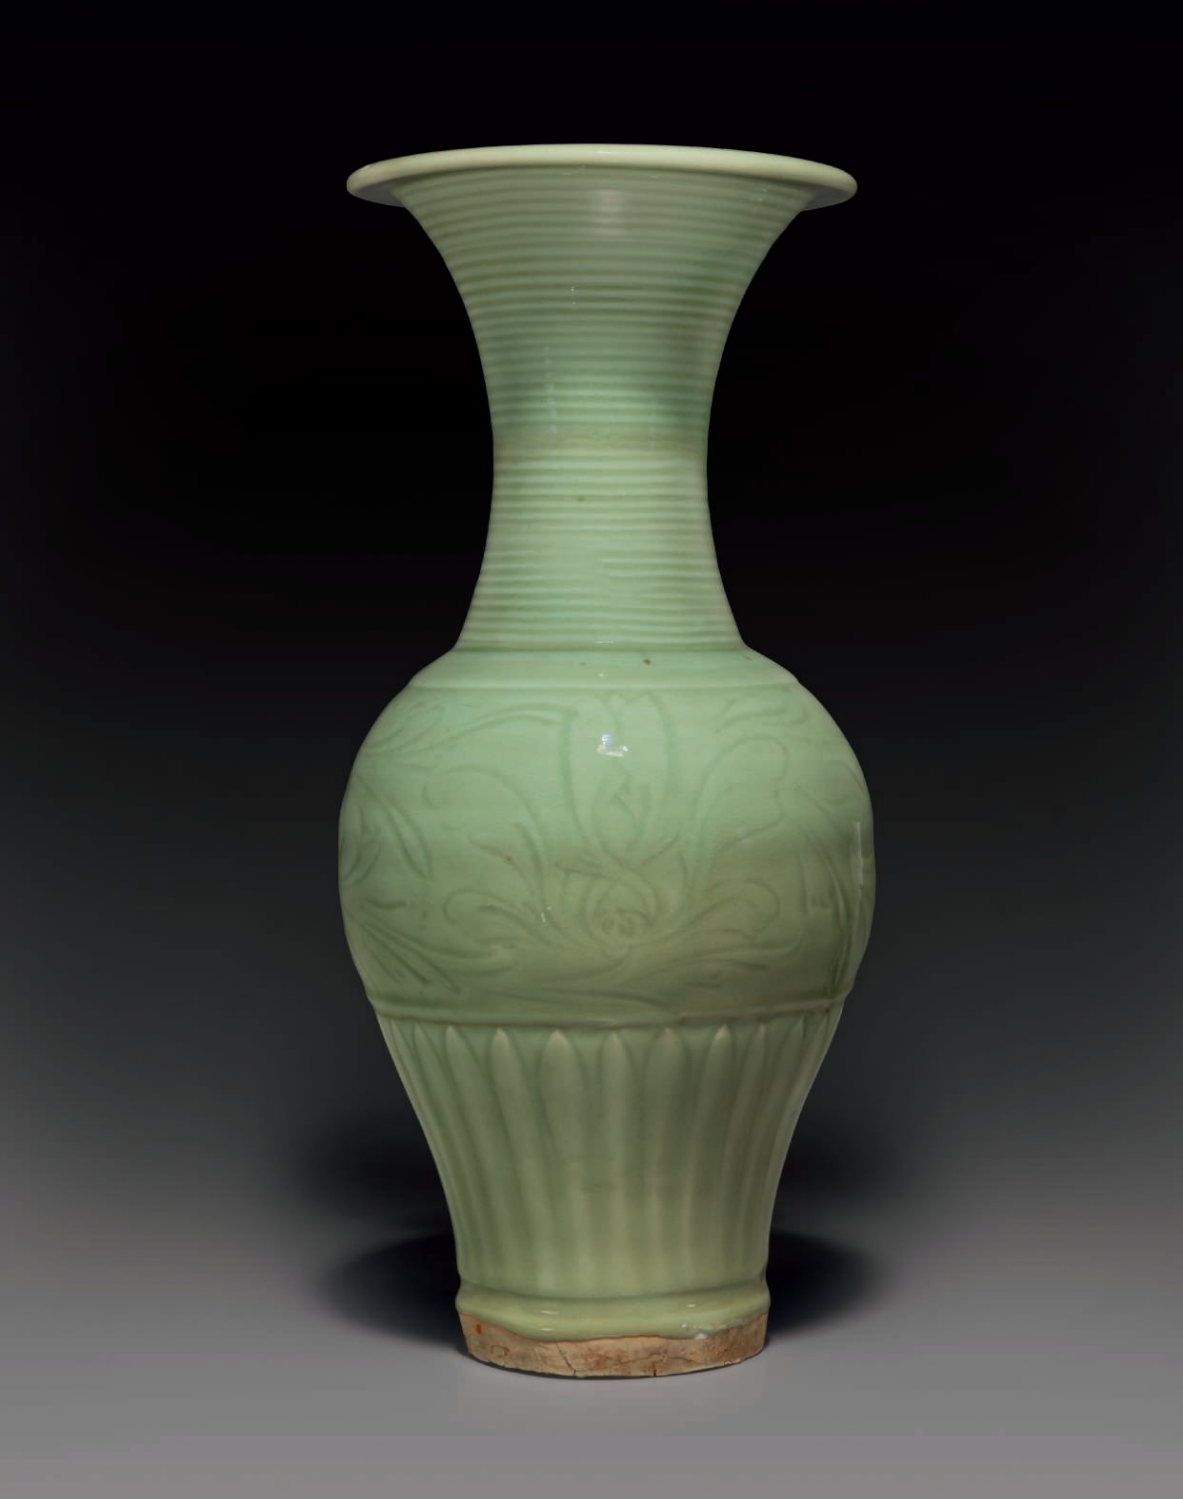 A carved Longquan celadon 'phoenix-tail' vase, Late Yuan-early Ming dynasty, 14th century